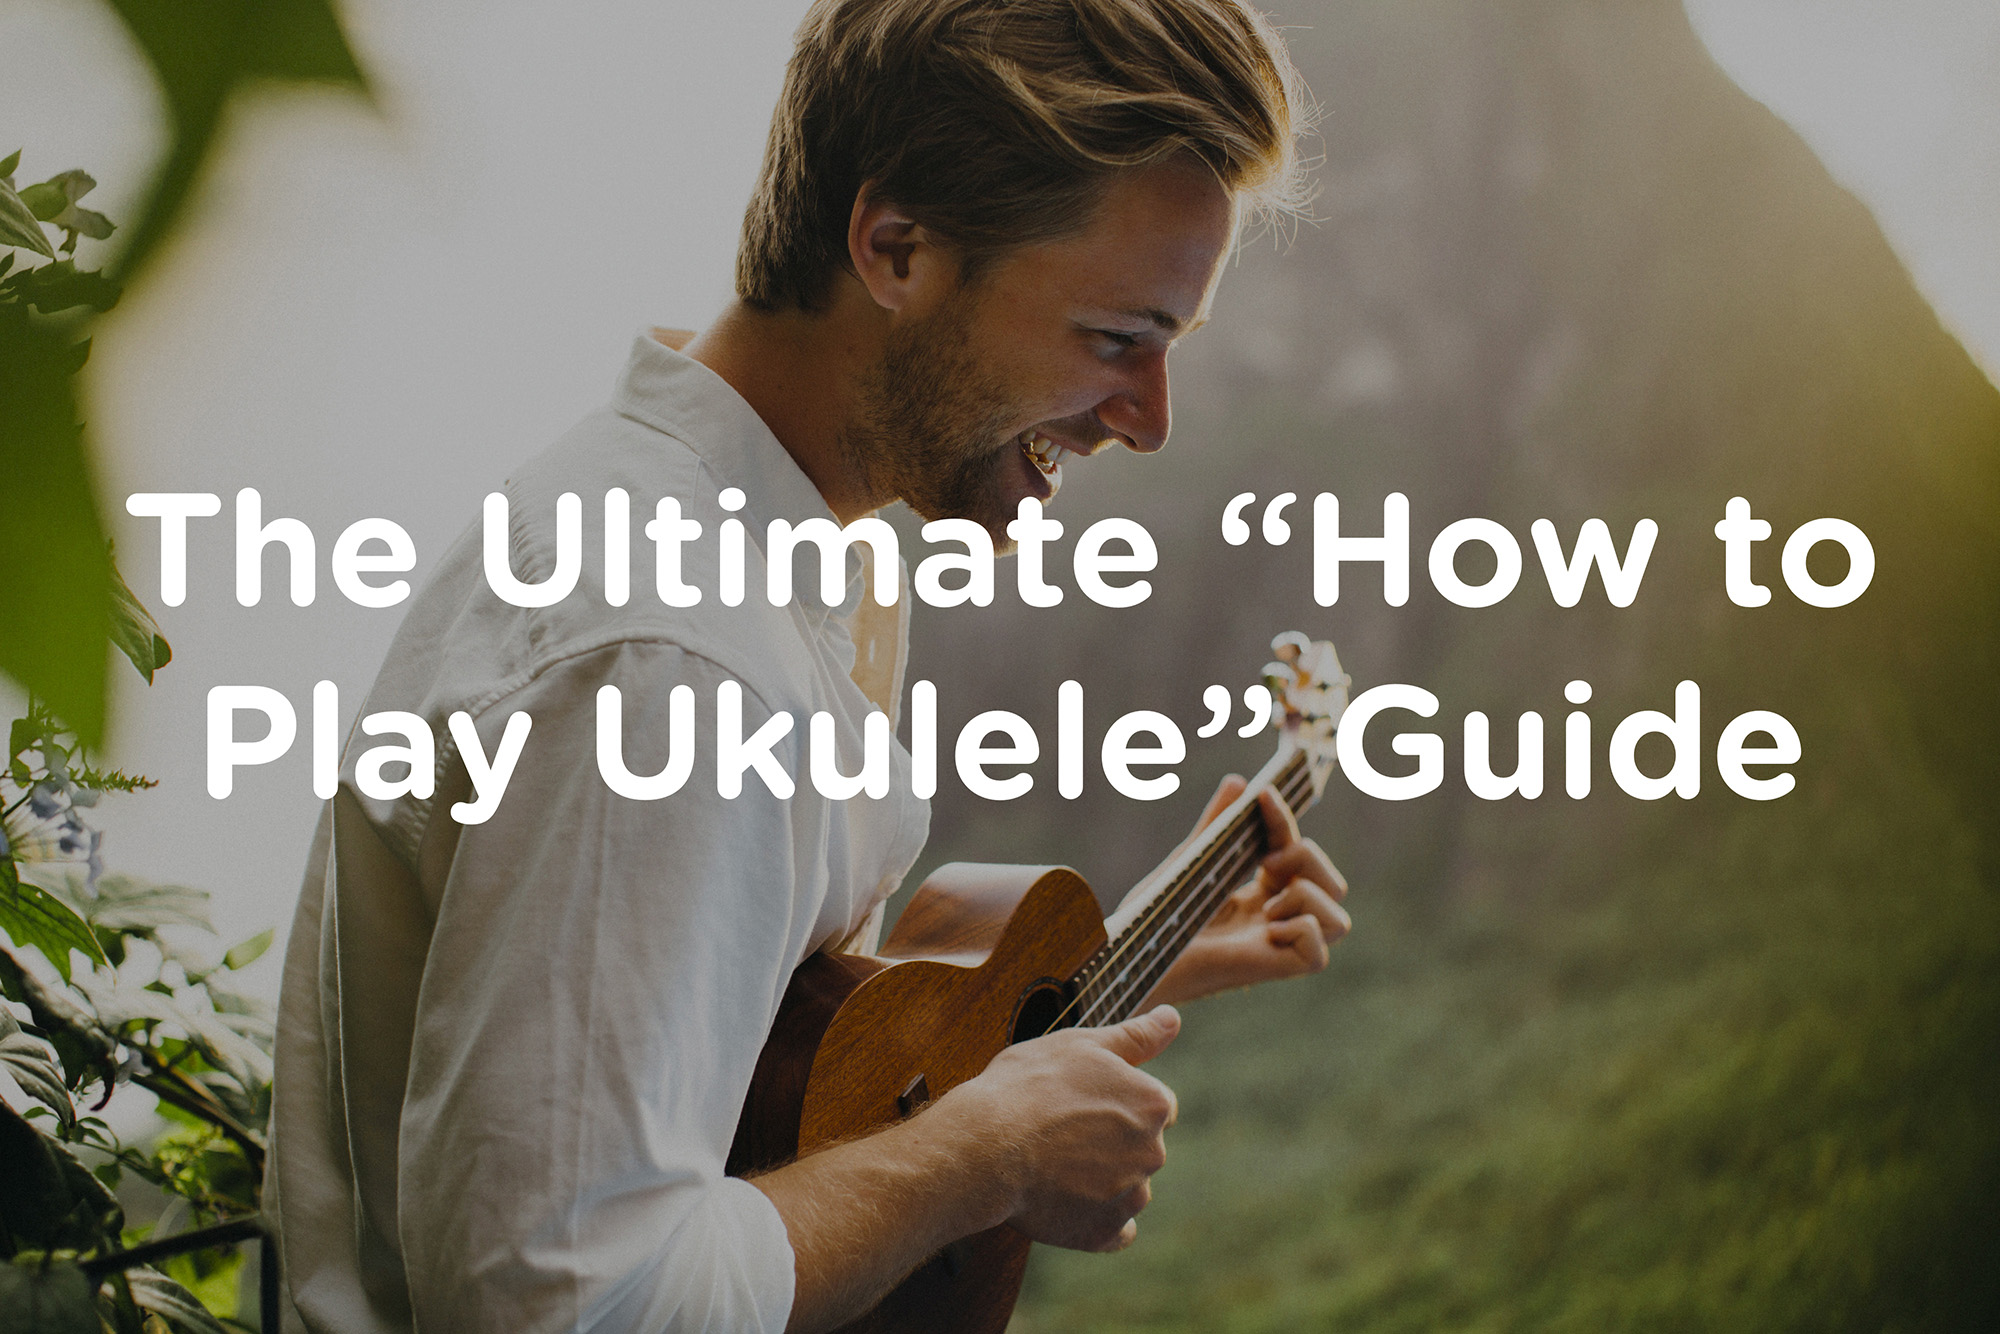 How to Play Ukulele: The Ultimate Guide to Learn to Play Ukulele Today | Ukulele Tricks